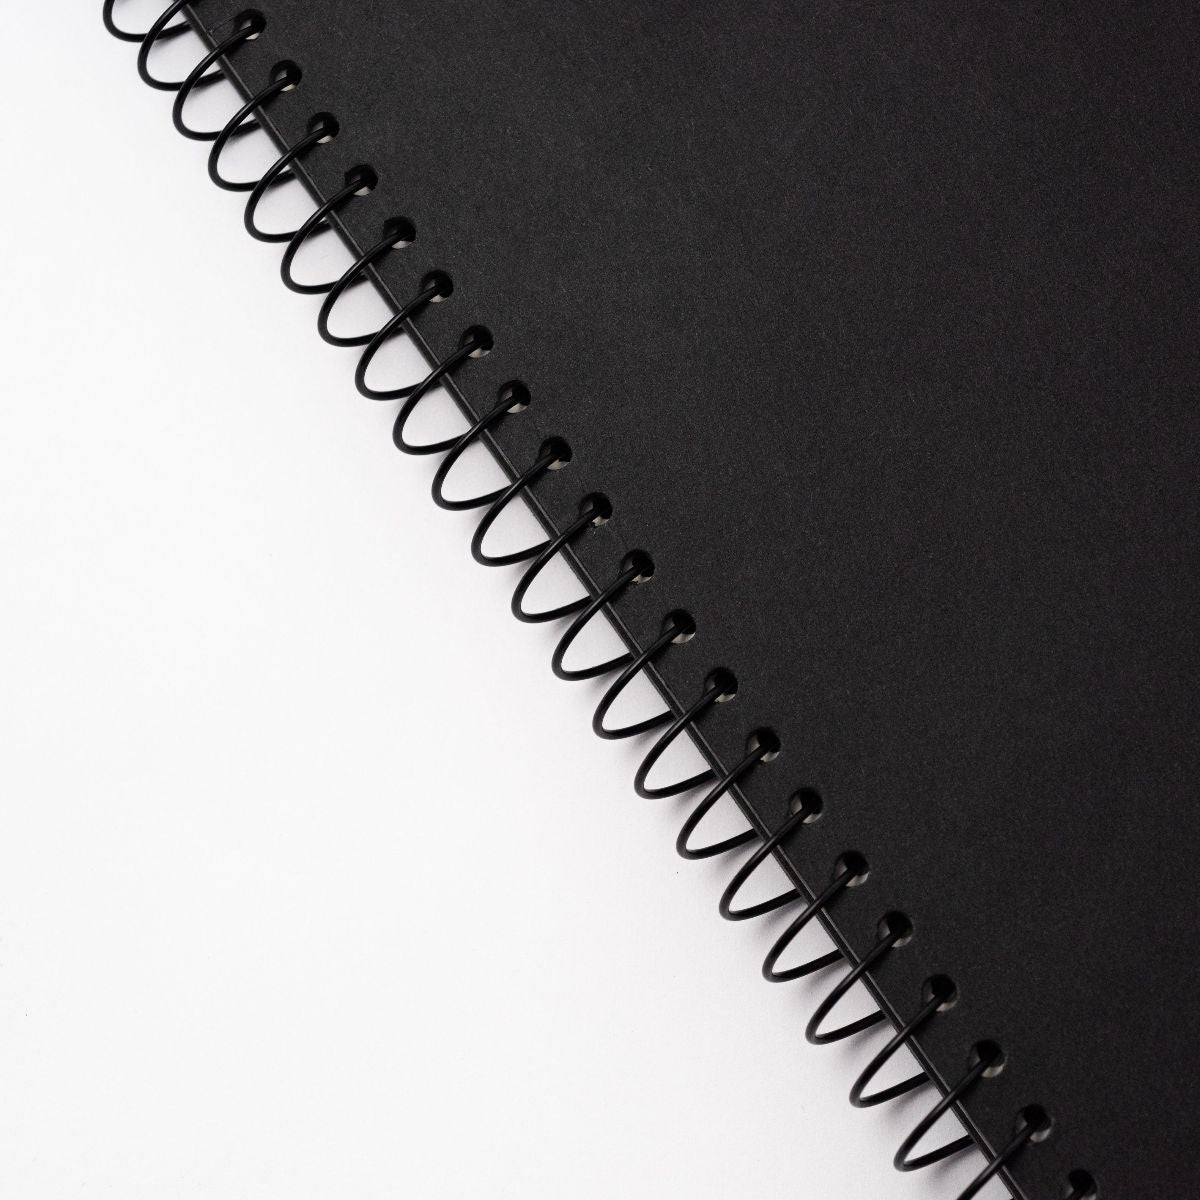 A Blackwing Spiral Notebook on a white background.